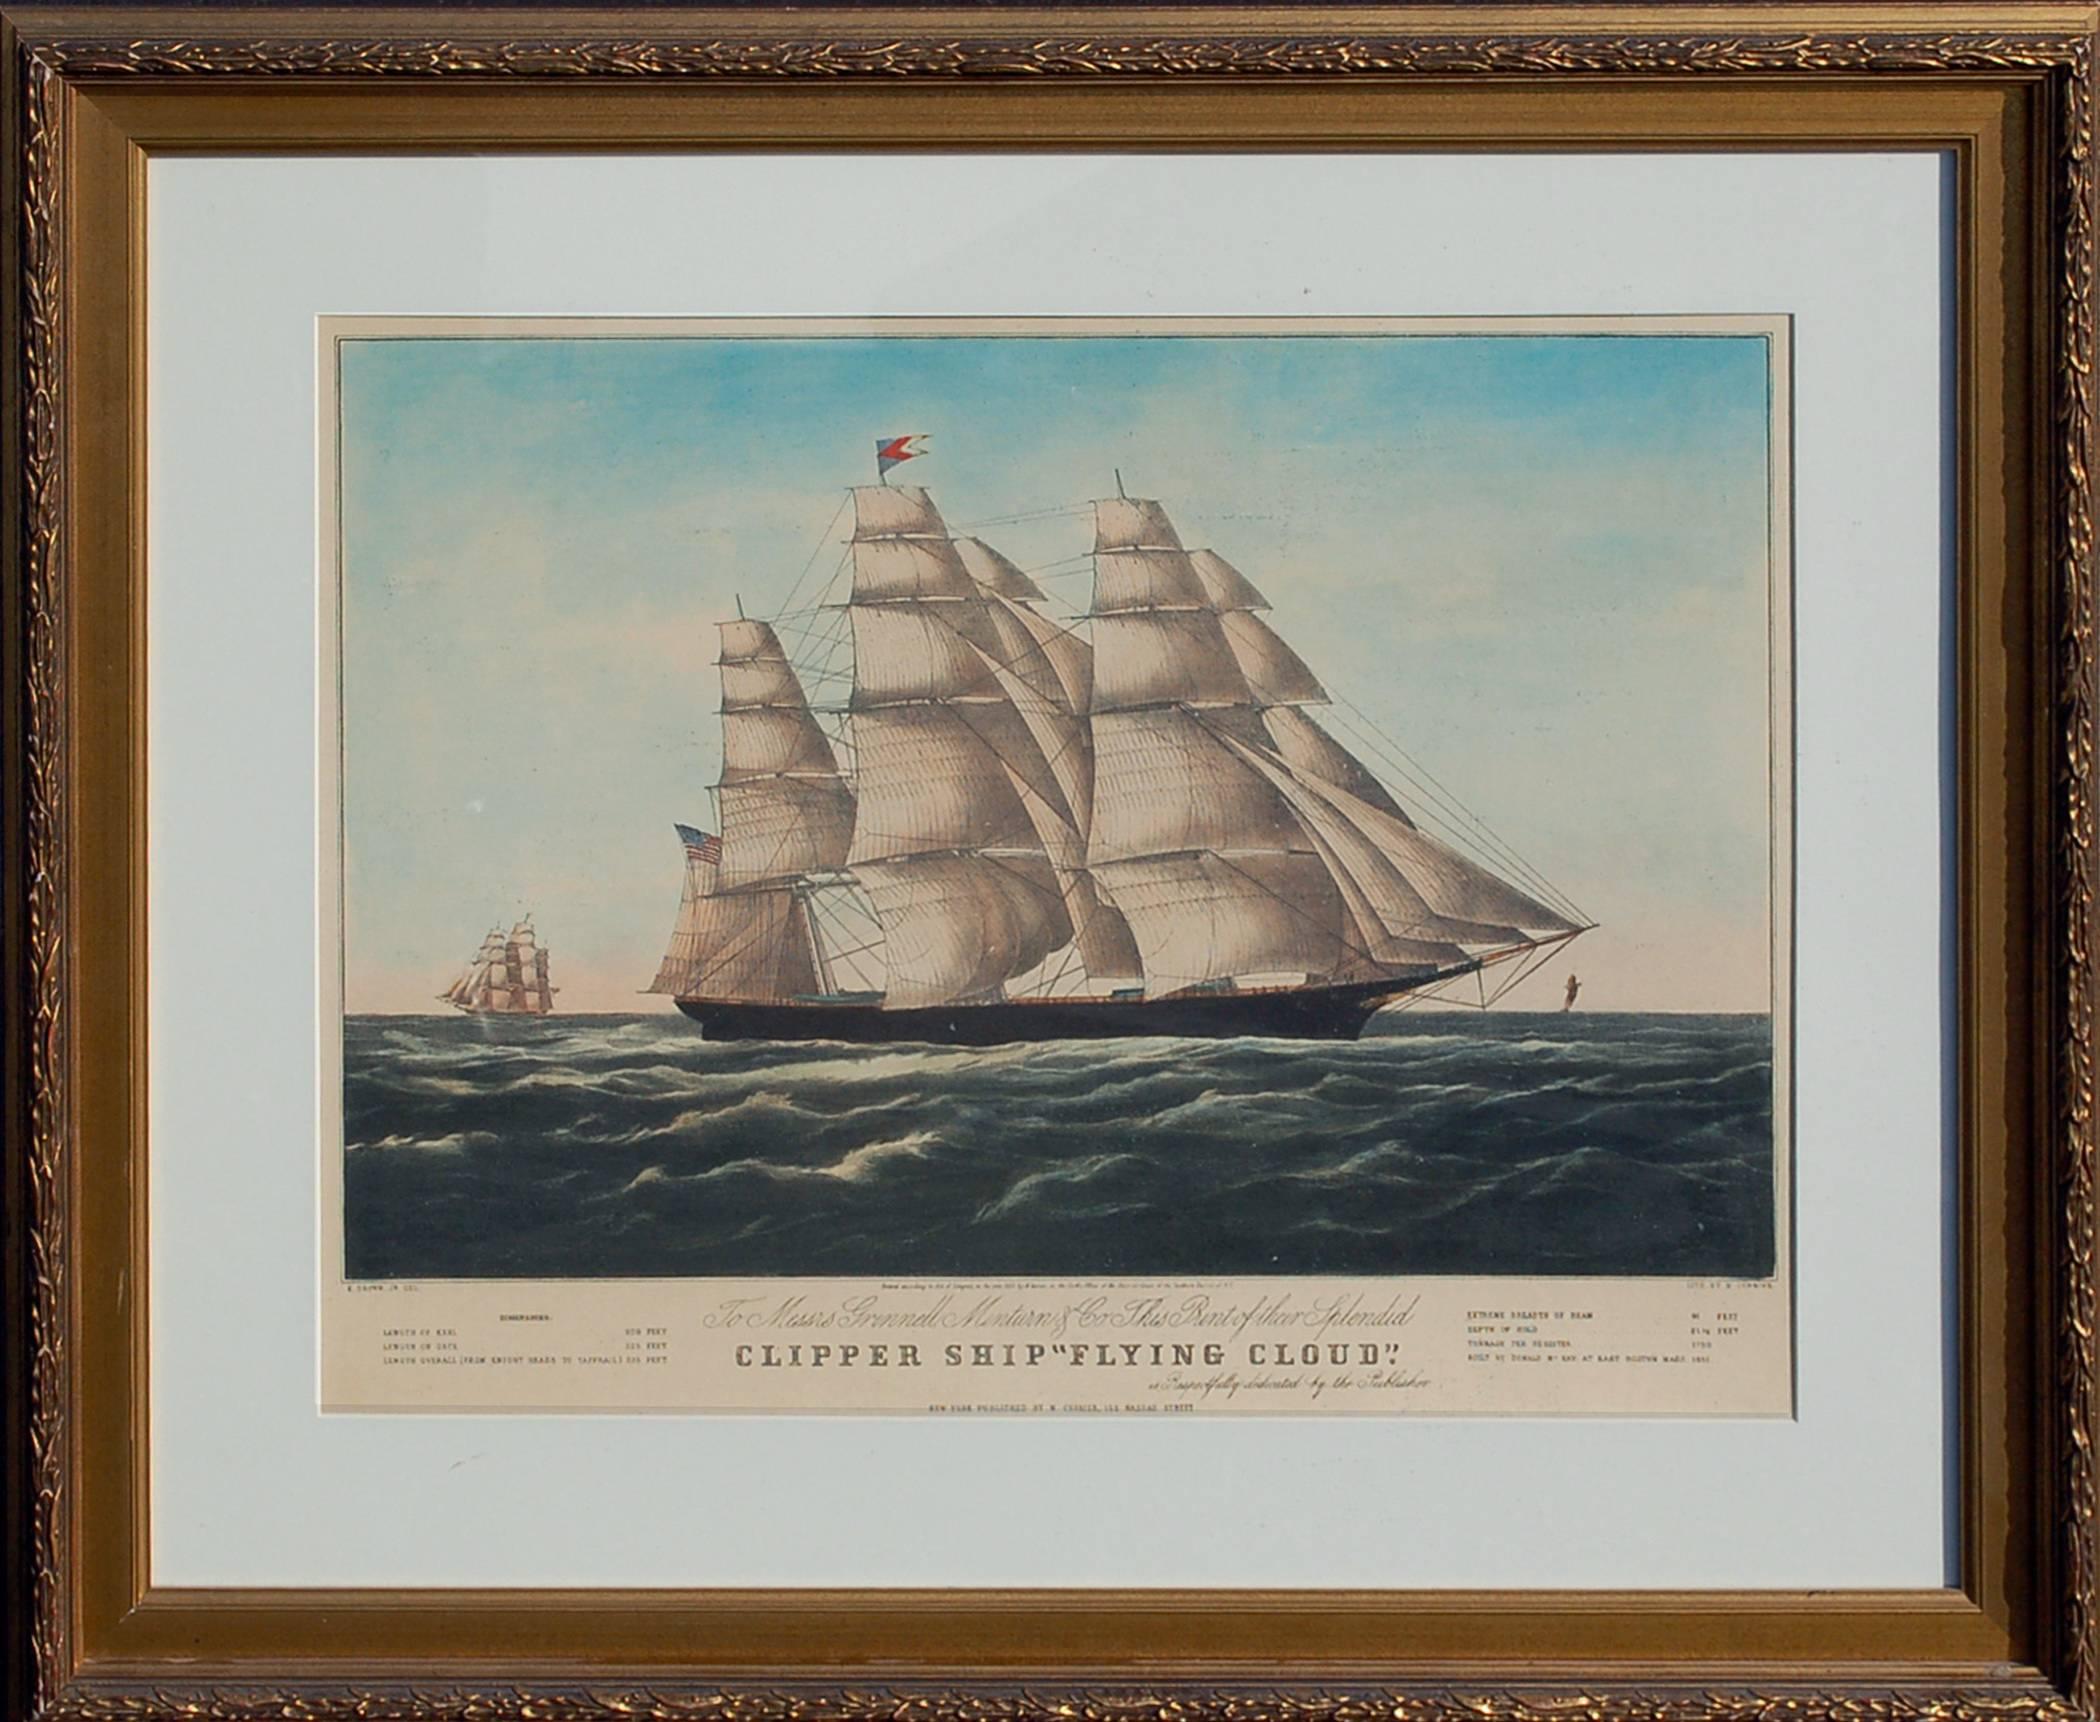 Clipper Ship Flying Cloud - Print by Currier & Ives